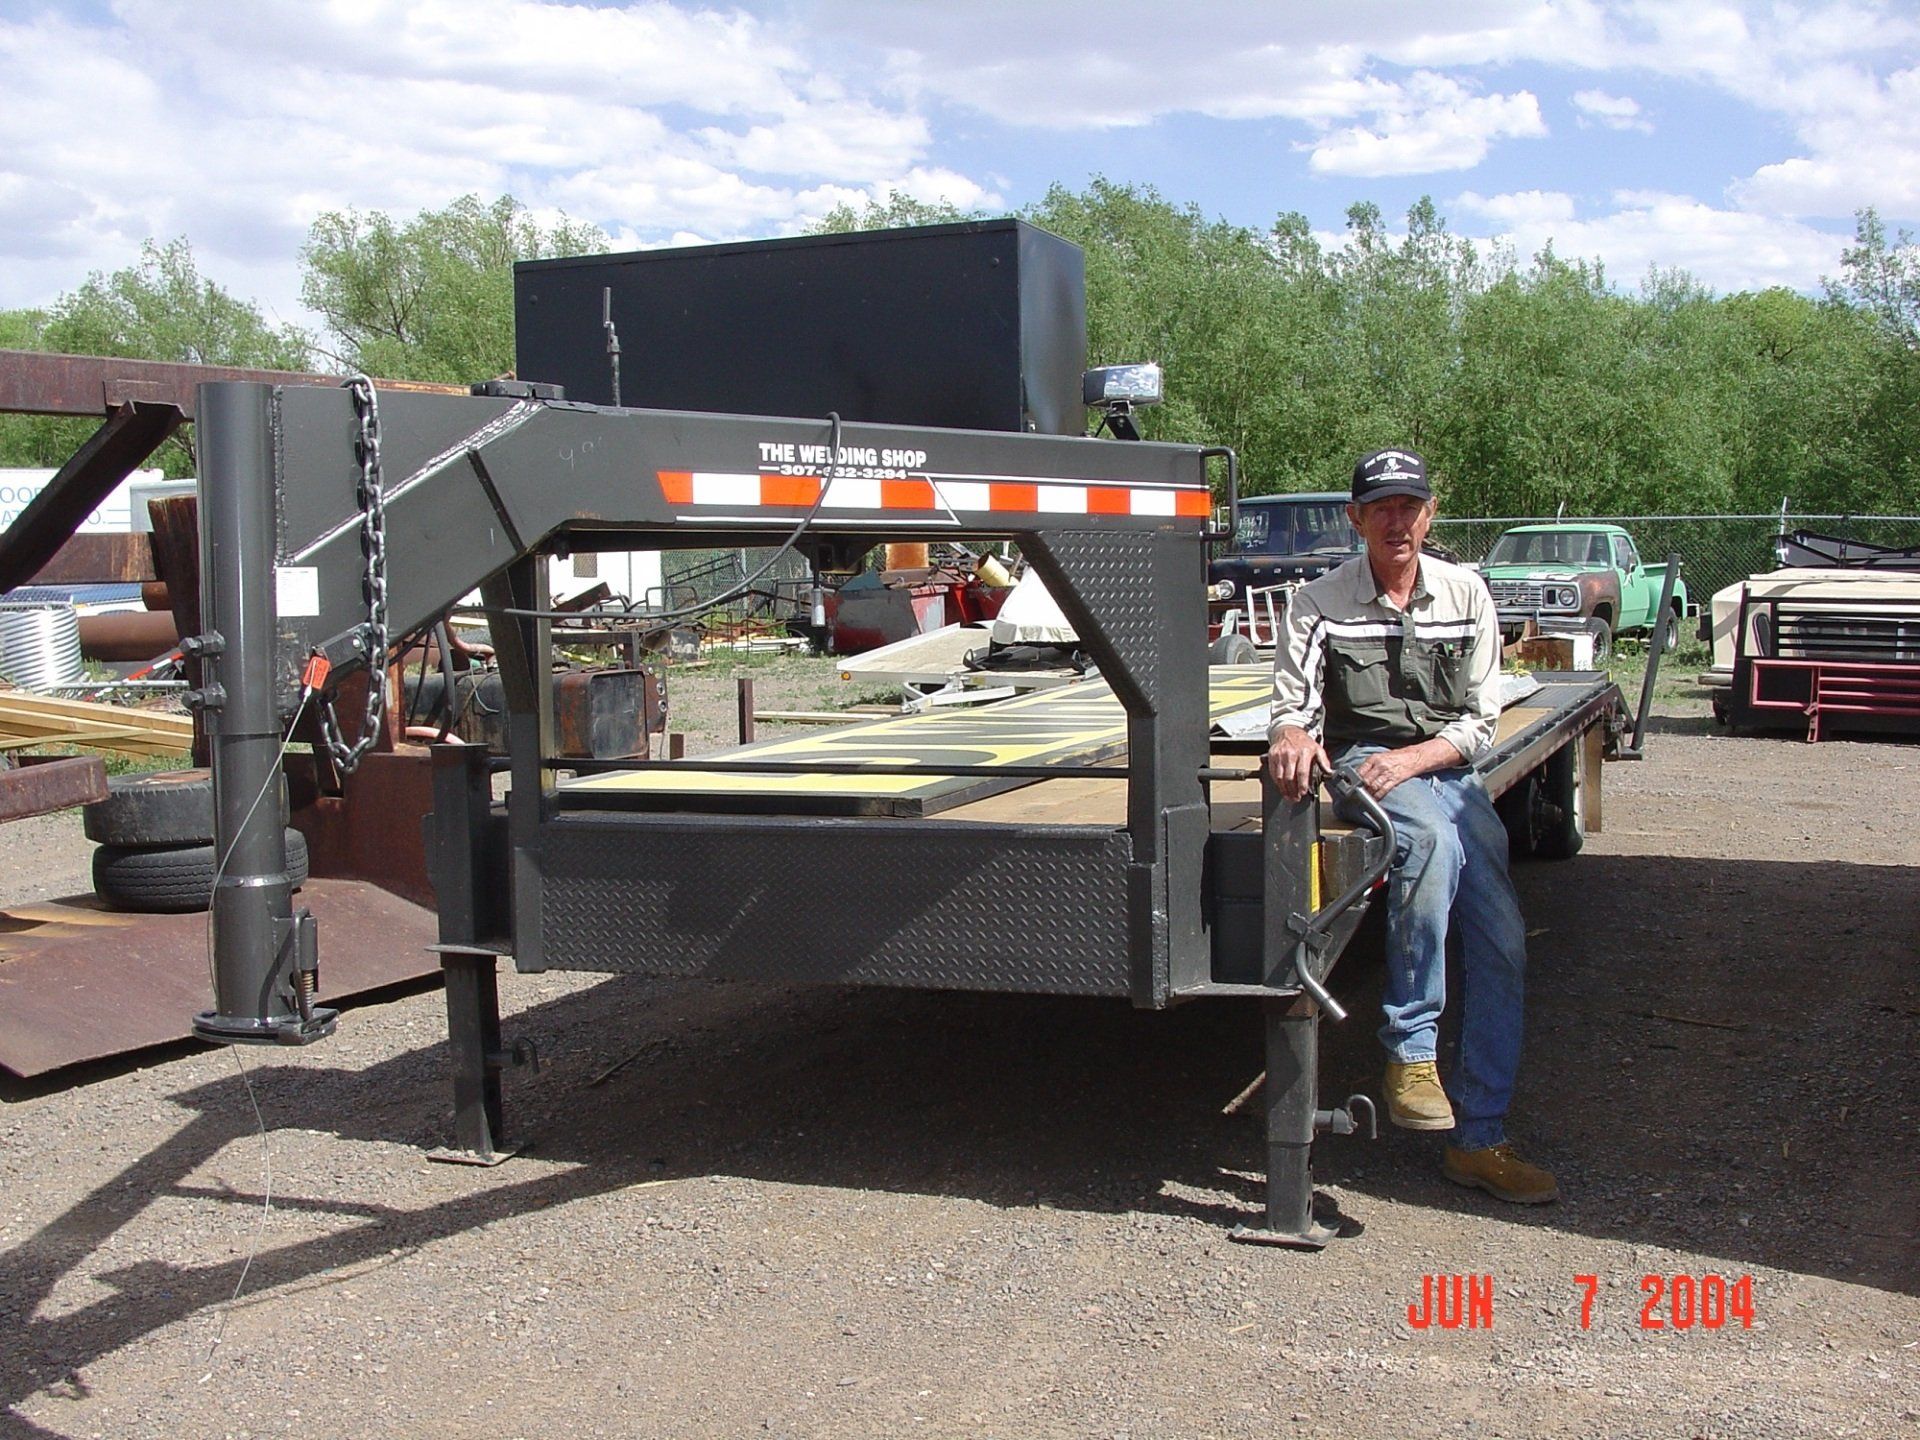 fabrication services - hitch repairs in Cheyenne, WY